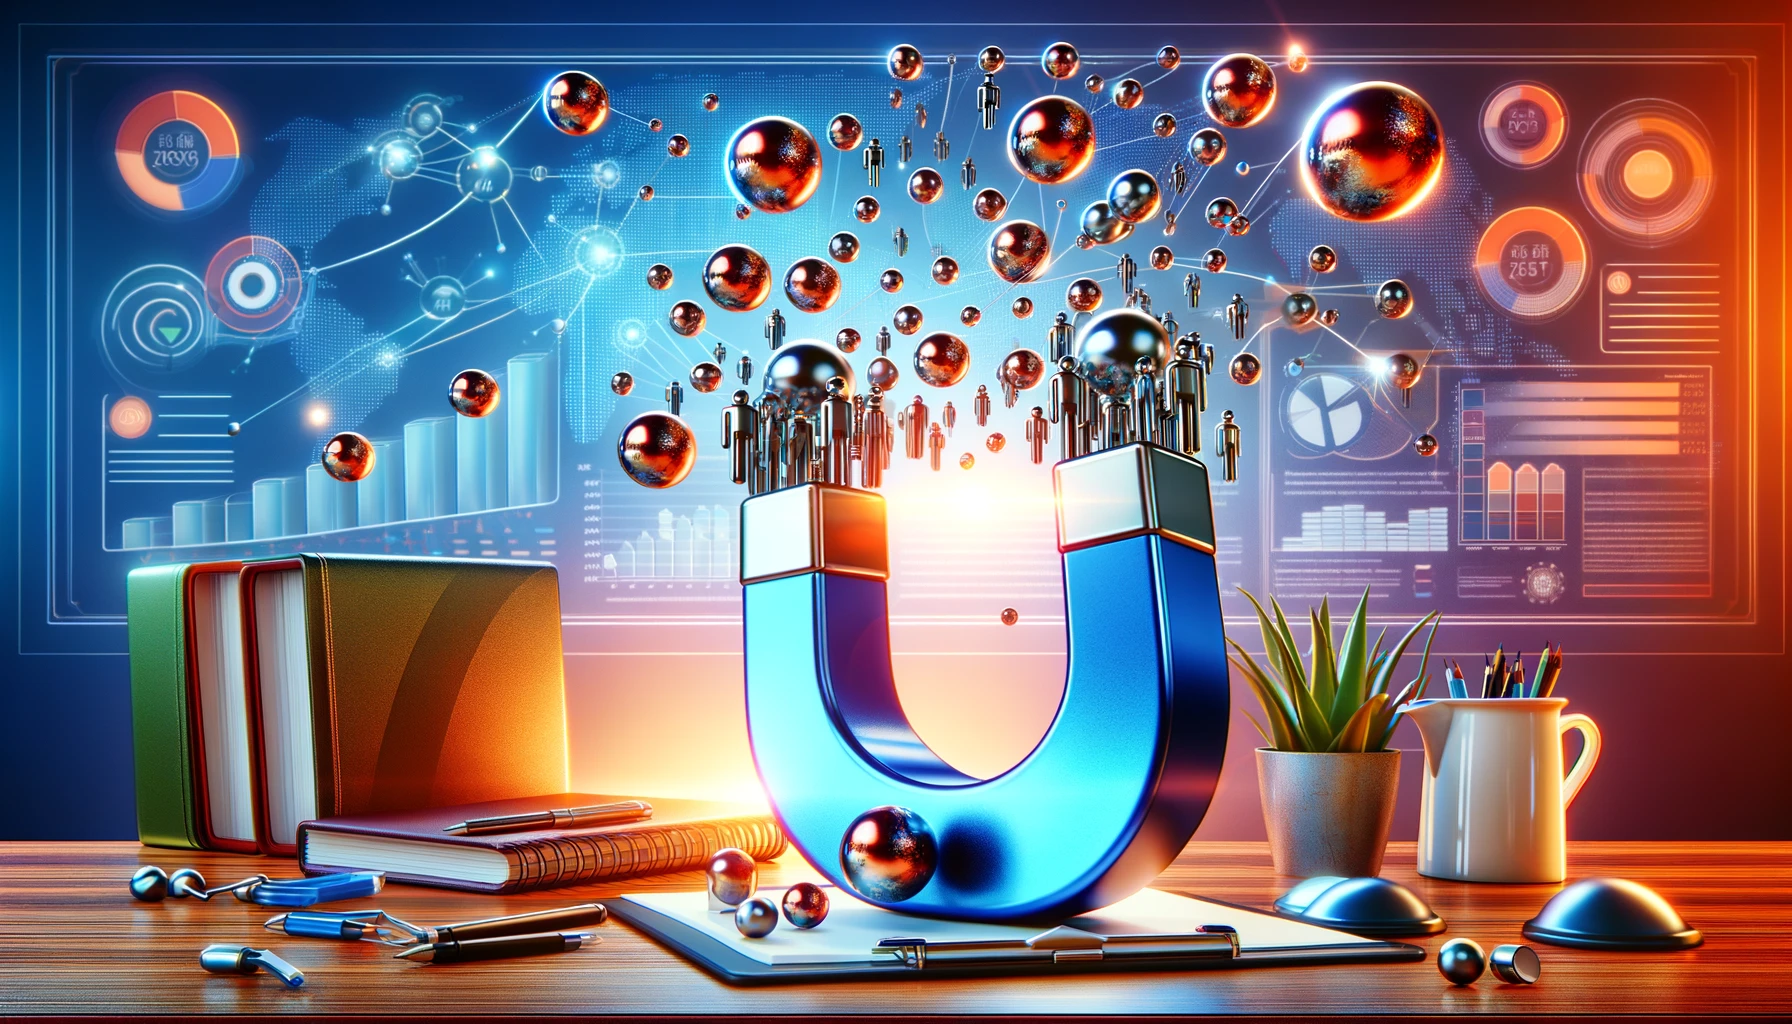 A vibrant visualization of Lead Generation Strategies depicted by a magnet attracting metallic spheres and characters within an abstract office setting, symbolizing potential customers and business growth.